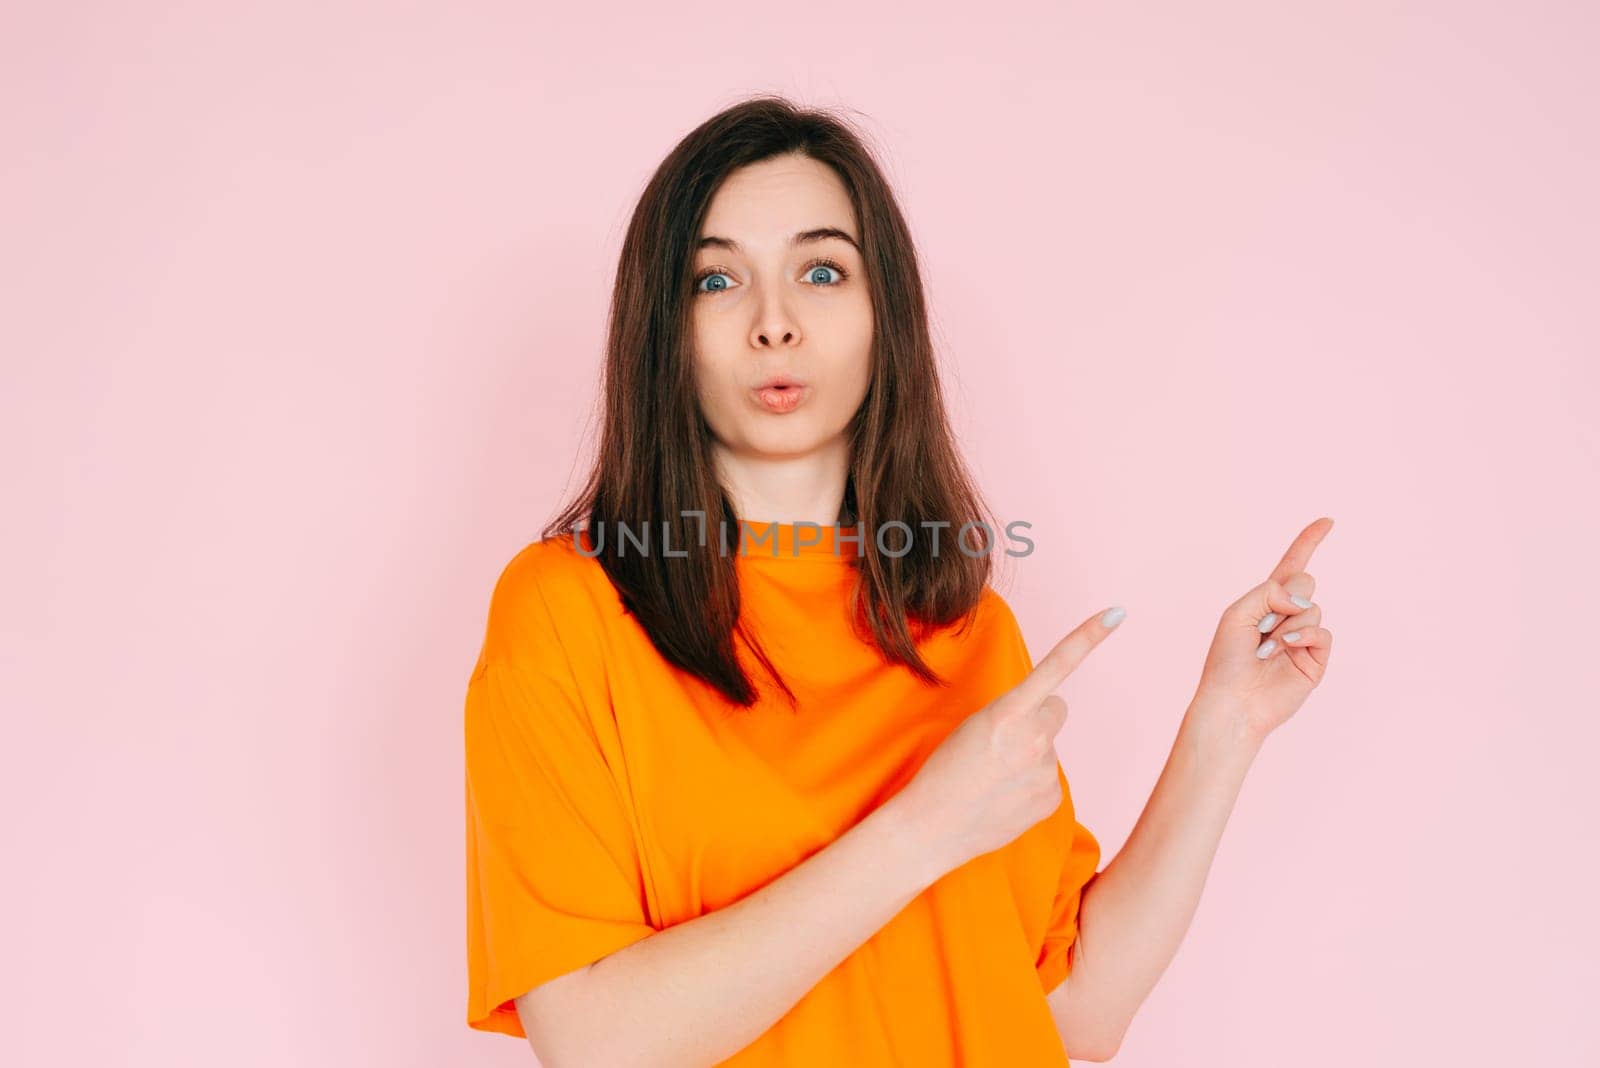 Playful Gesture: Humorous Woman Showing Two Fingers Pointing at Empty Space - Fun and Interaction Concept on Vibrant Pink Background